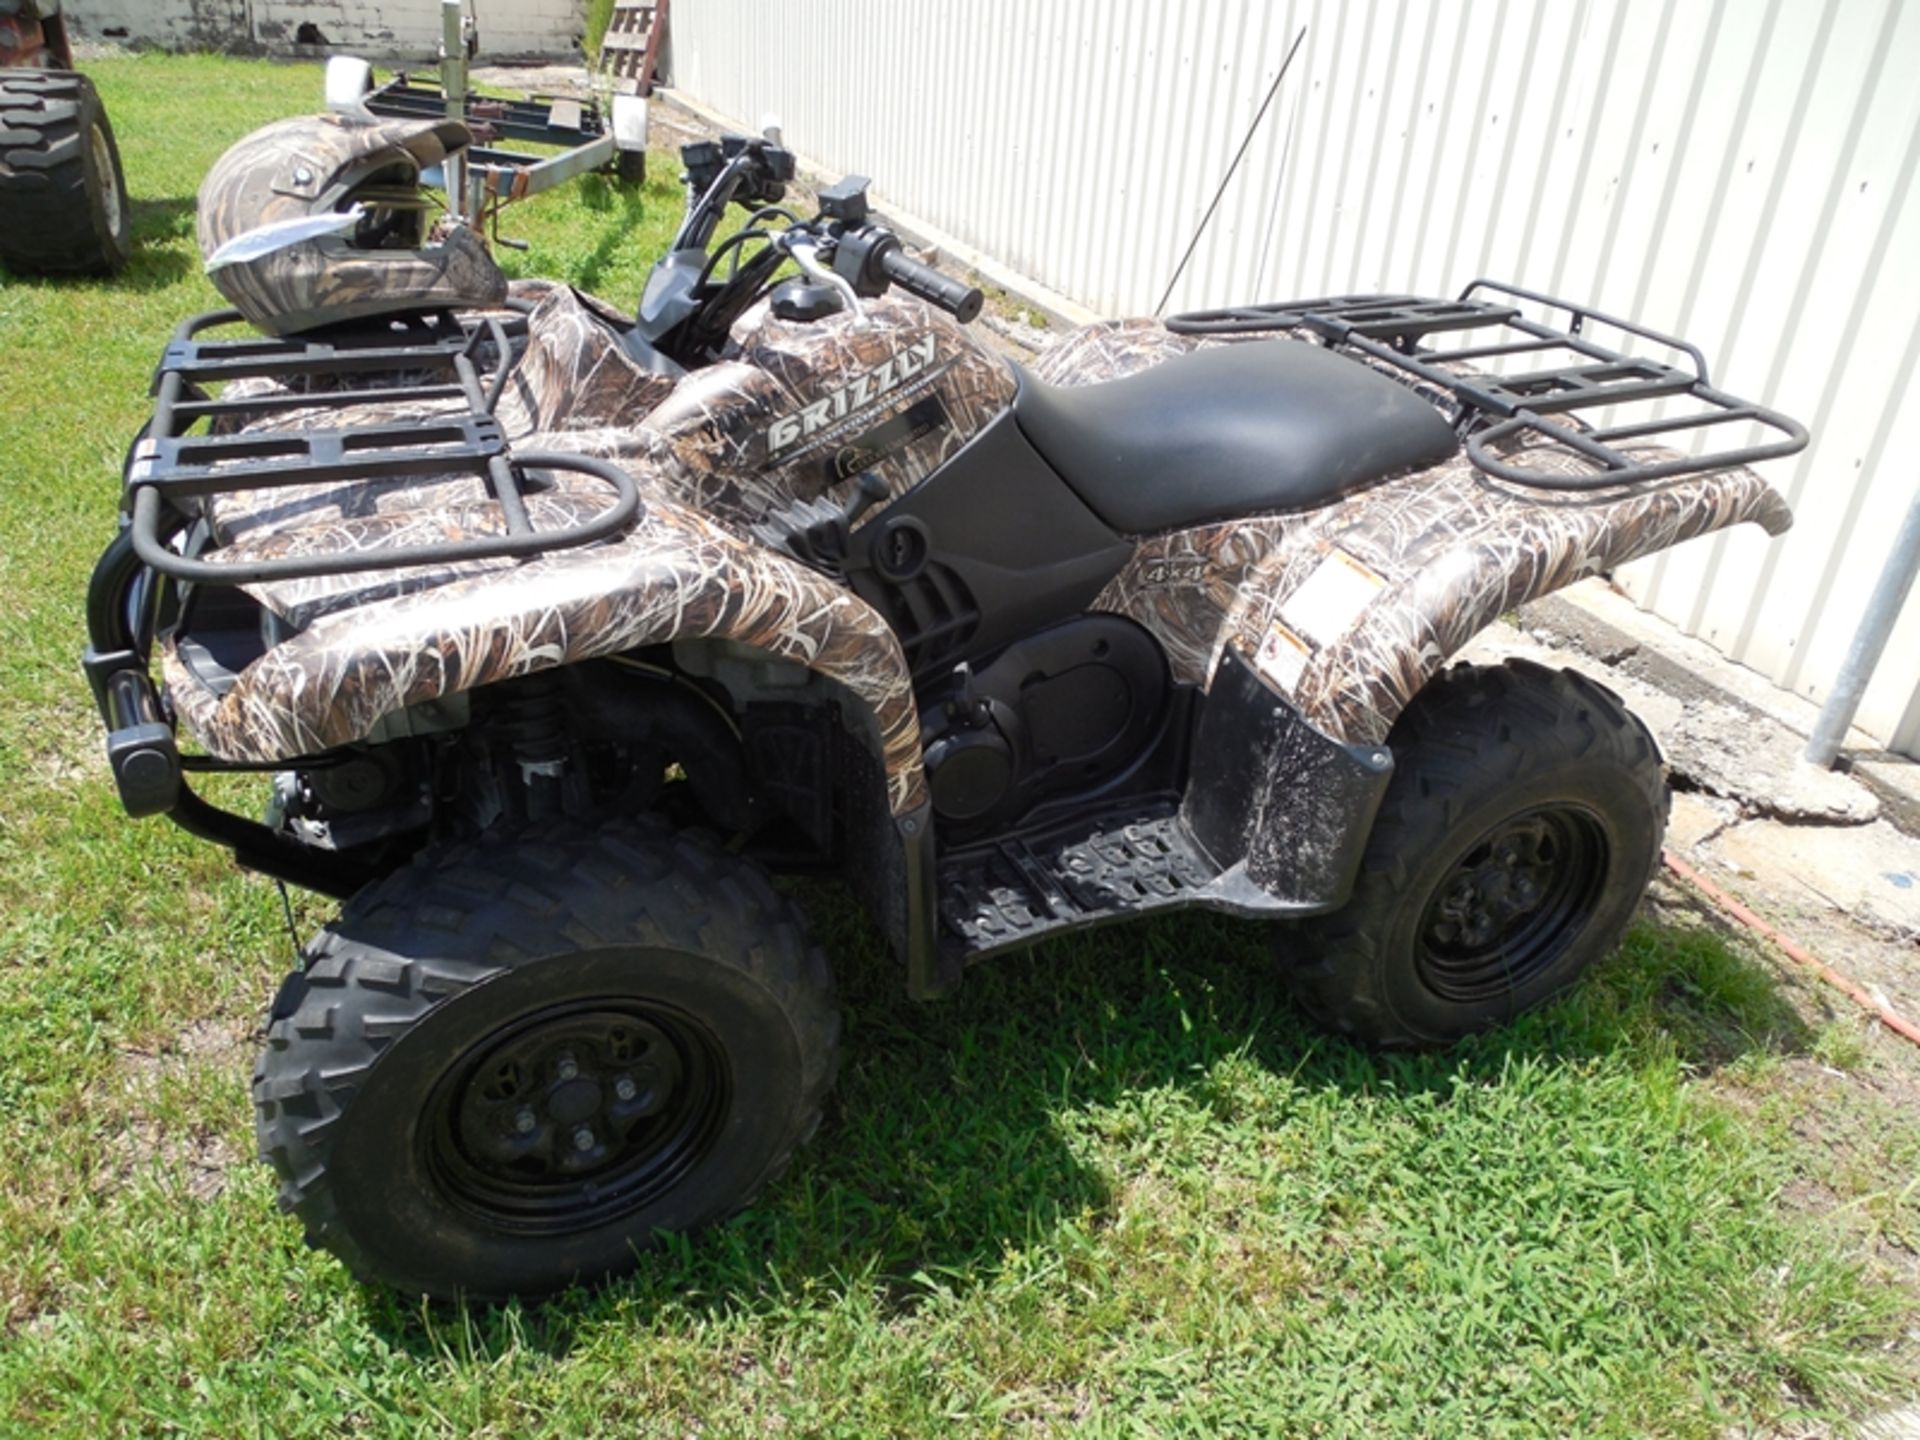 Yamaha Grizzly DU Edition 660 cc 4wd 837 hrs - Image 2 of 2